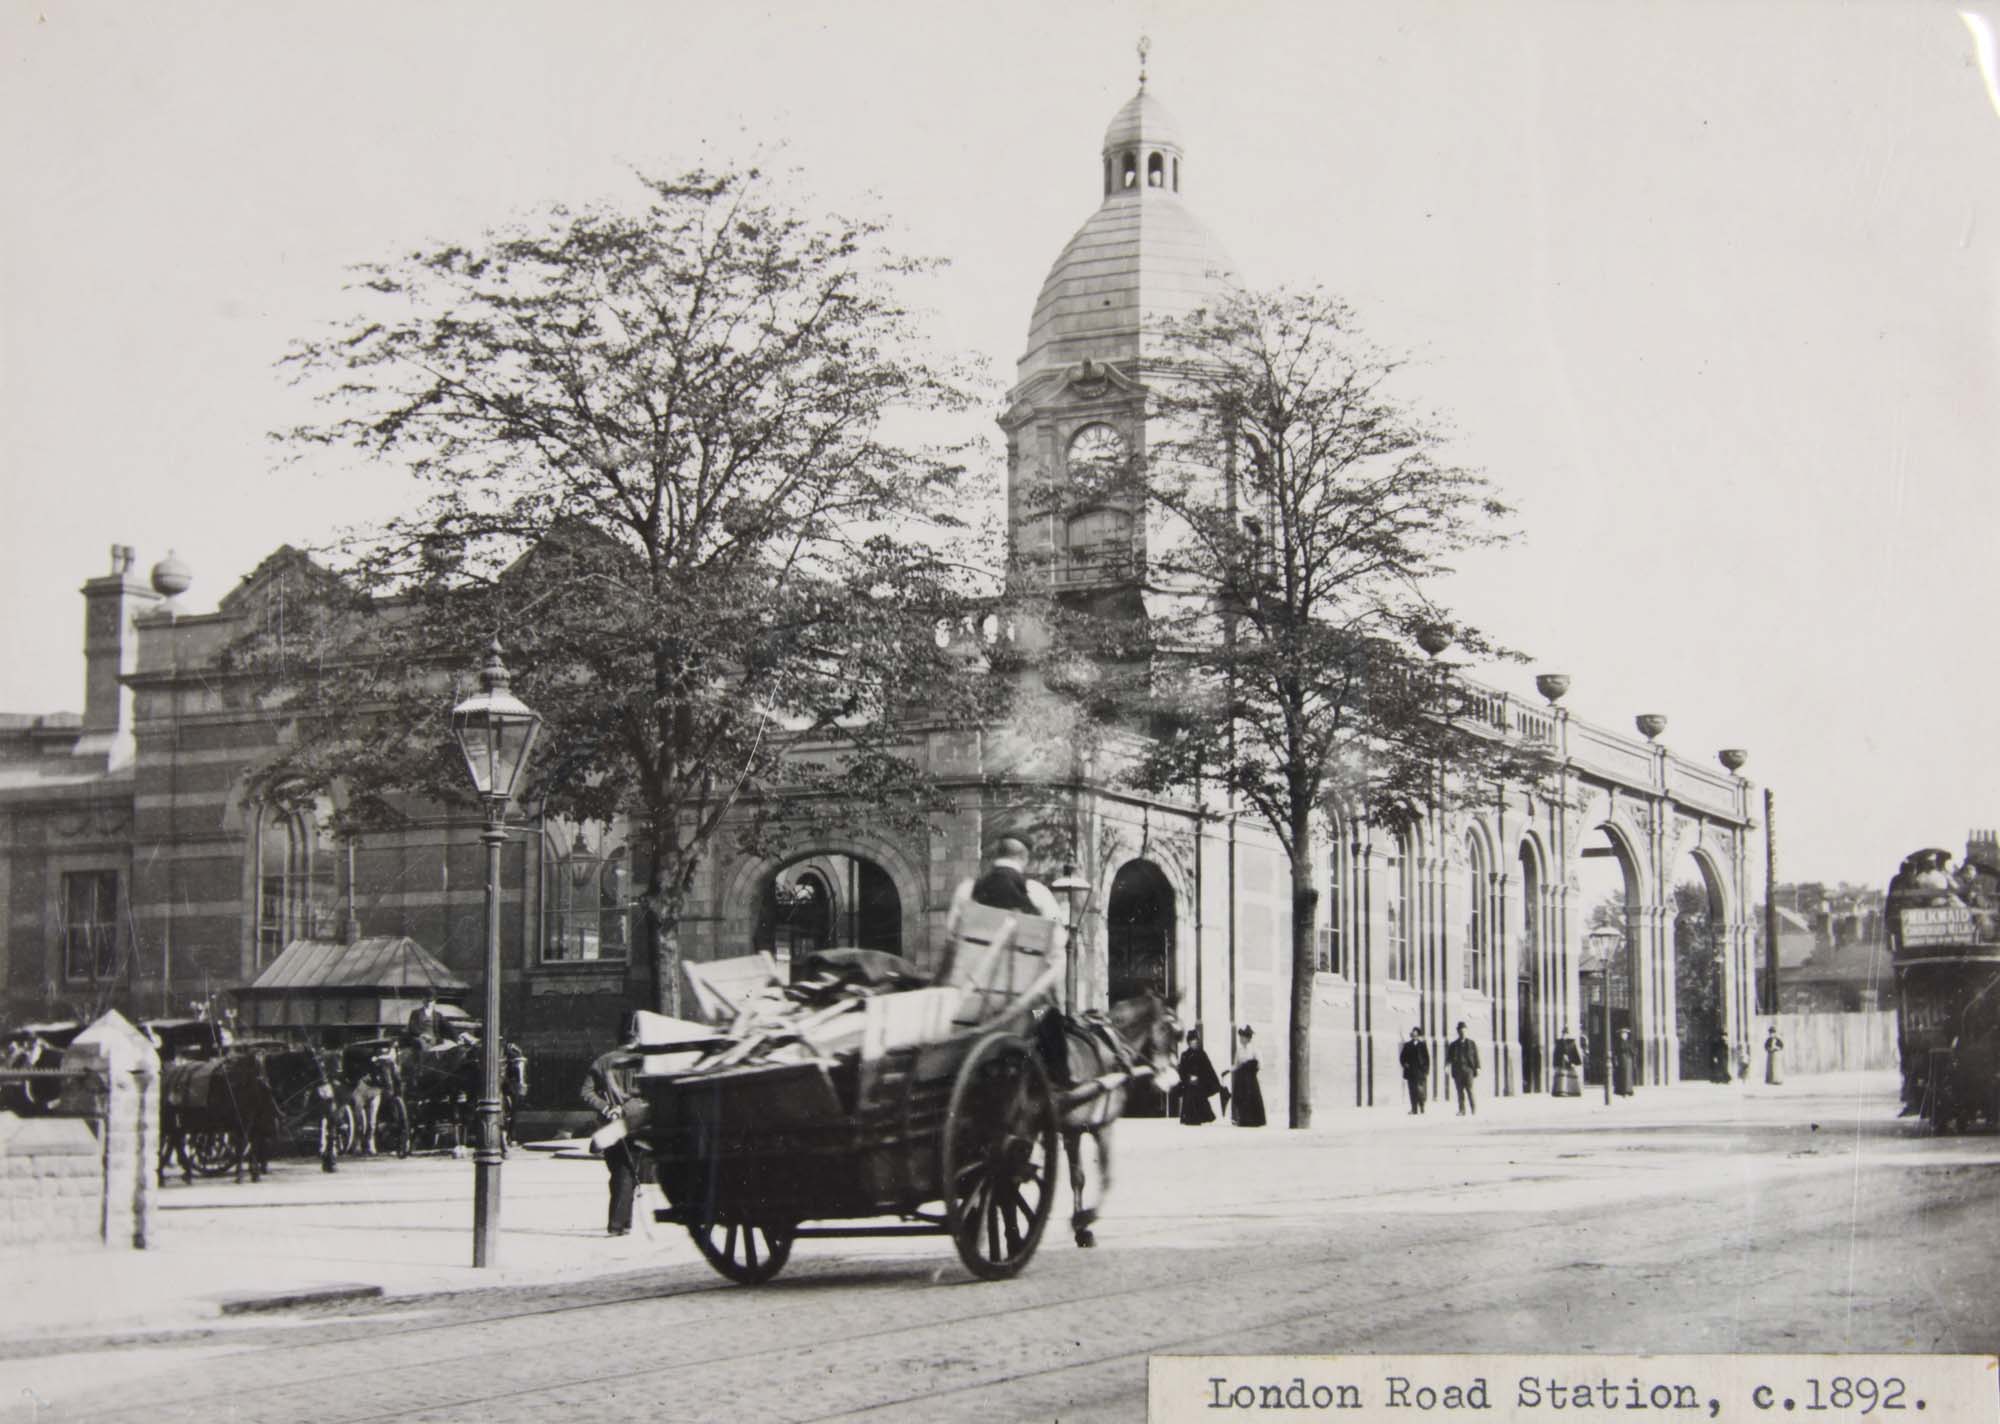 London Road Station, 1892 - Leicestershire Record Office